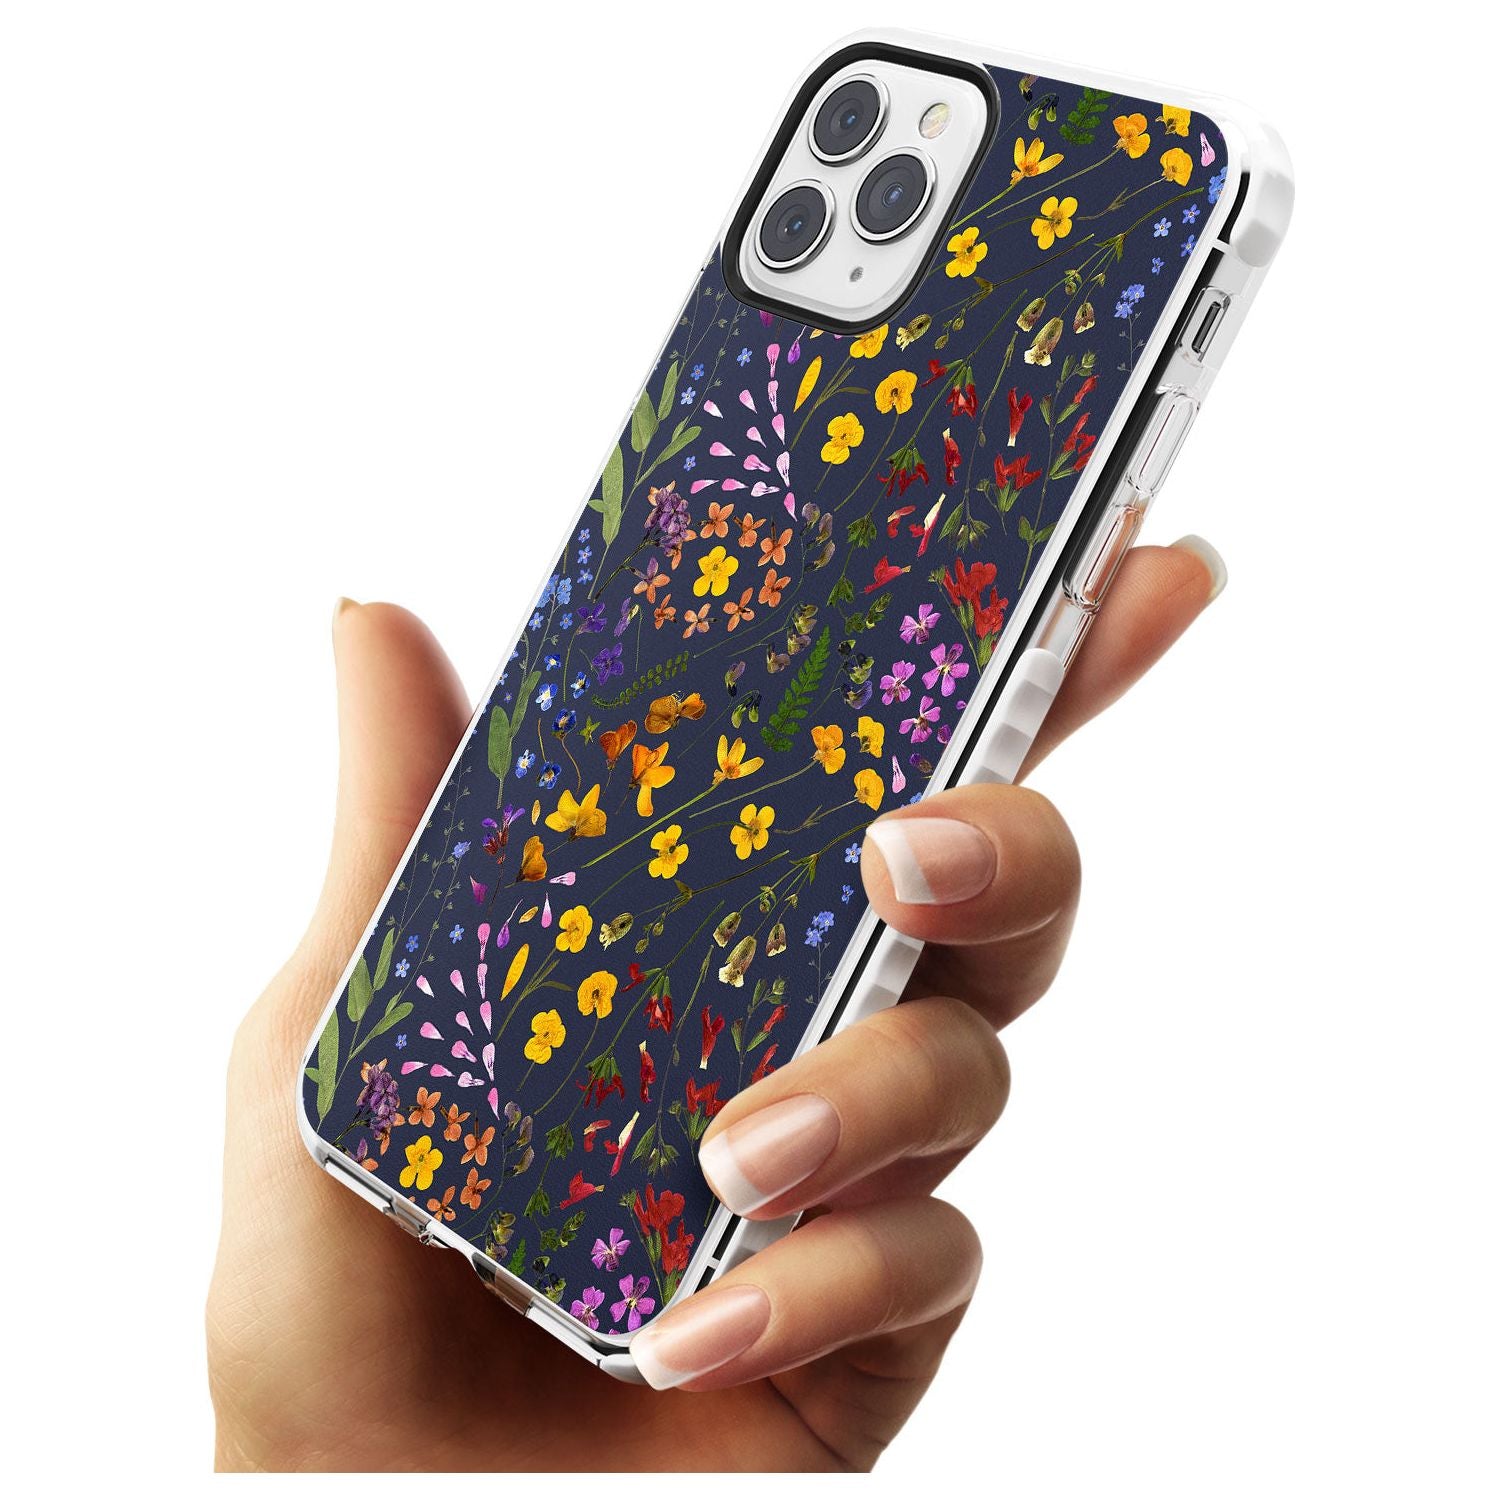 Wildflower & Leaves Cluster Design - Navy Impact Phone Case for iPhone 11 Pro Max